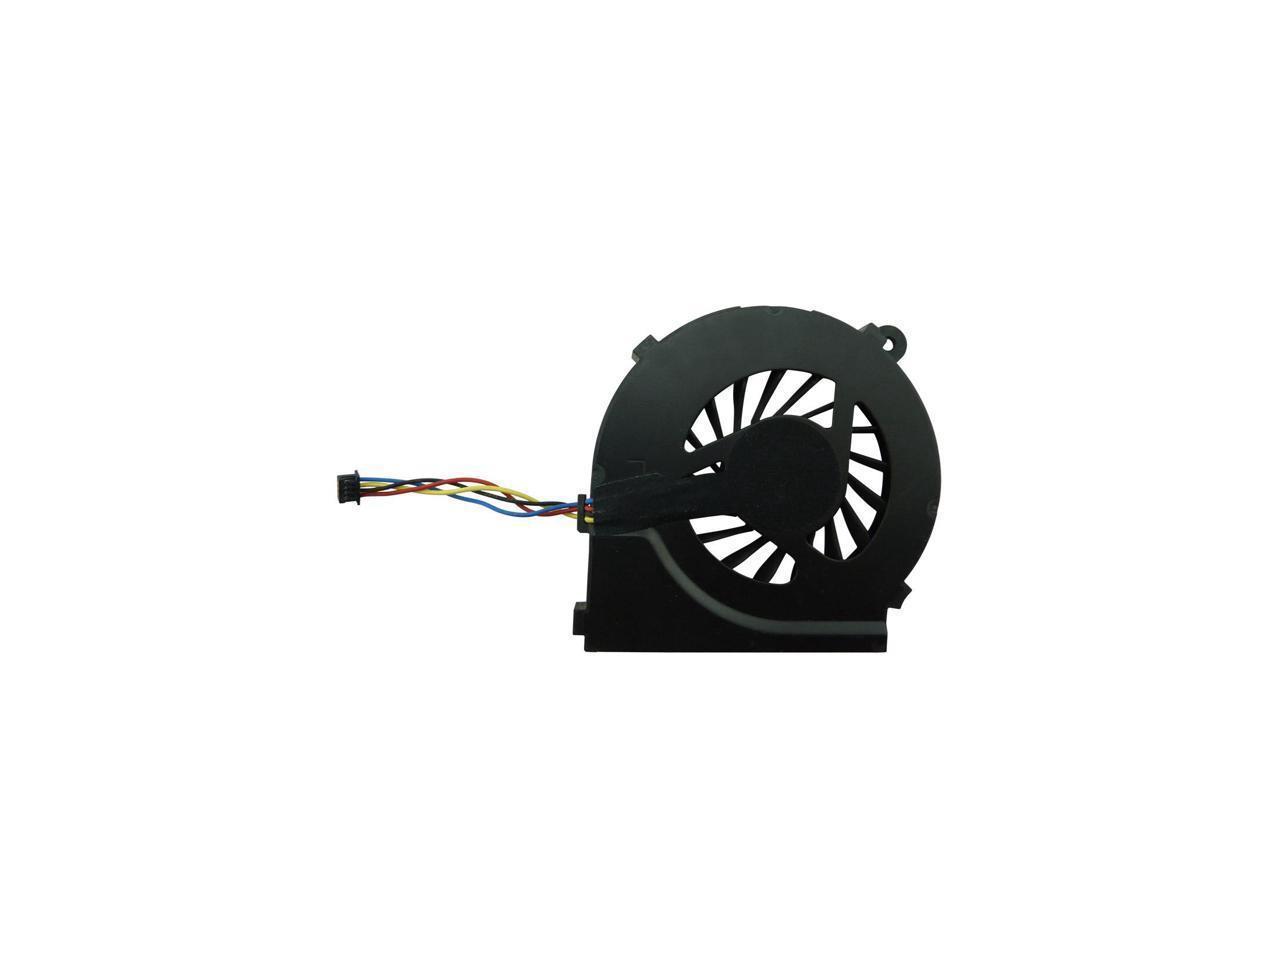 New For HP g6-1d60ca g6-1d60us g6-1d73us g6-1d40nr g6-1d44ca CPU FAN With Grease 